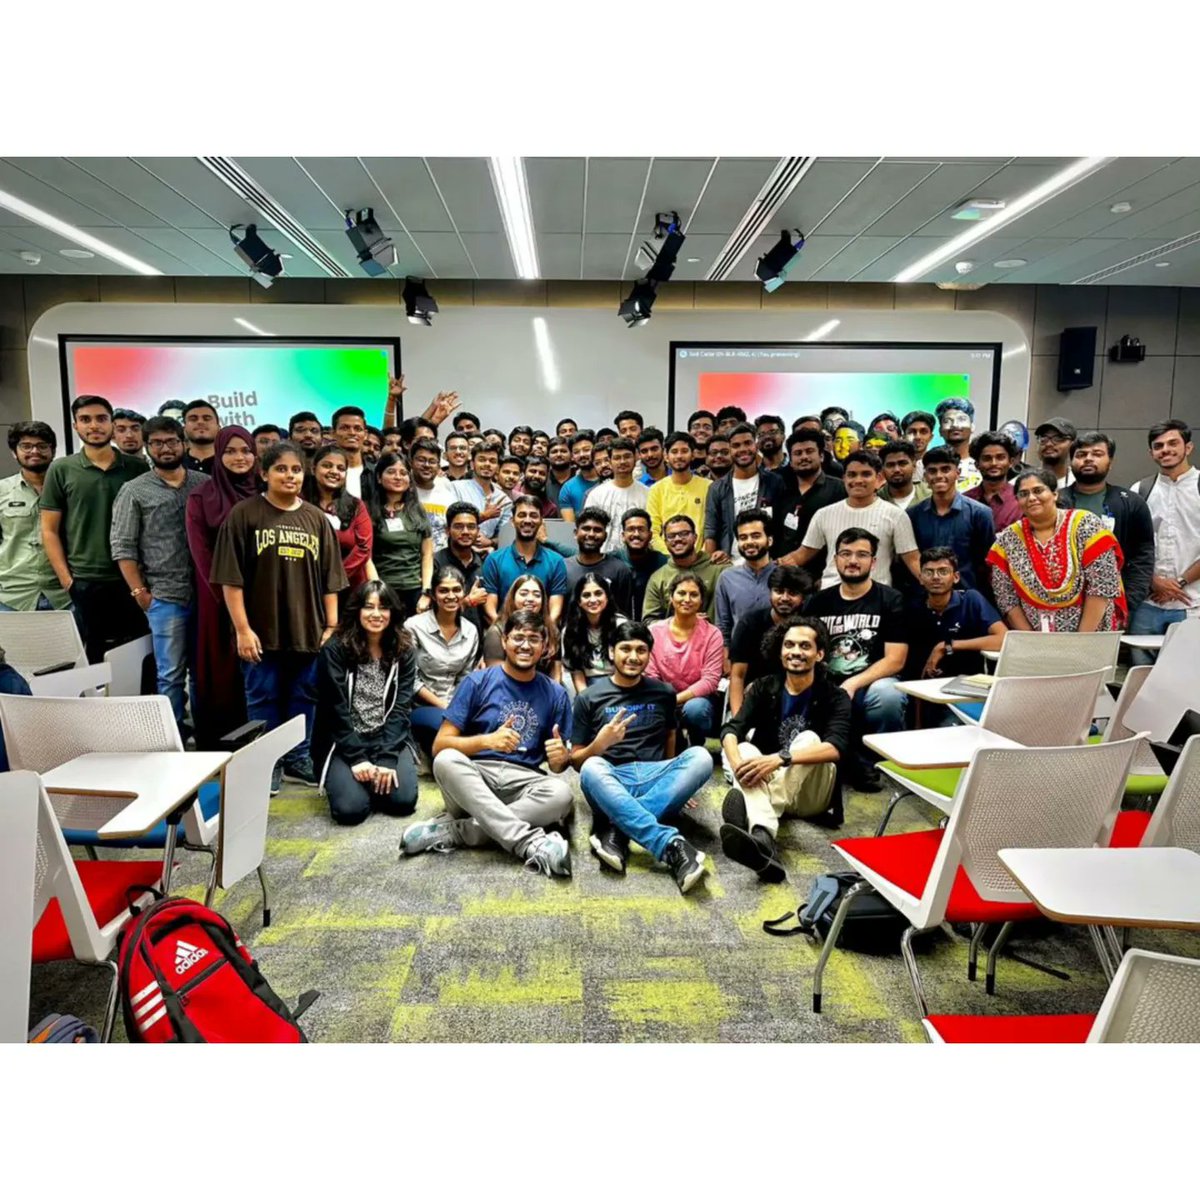 What a day it has been exploring the aspects of @Google technology with @hackthisfall
Special thanks to @siddharth_hacks for organising such a great event!

@hackthisfall @GoogleIndia

#GoogleDevLibrary #BuildWithHTF #HTFxGoogleDevLibrary #TechEvent #GoogleTech #FlutterDev ⚫